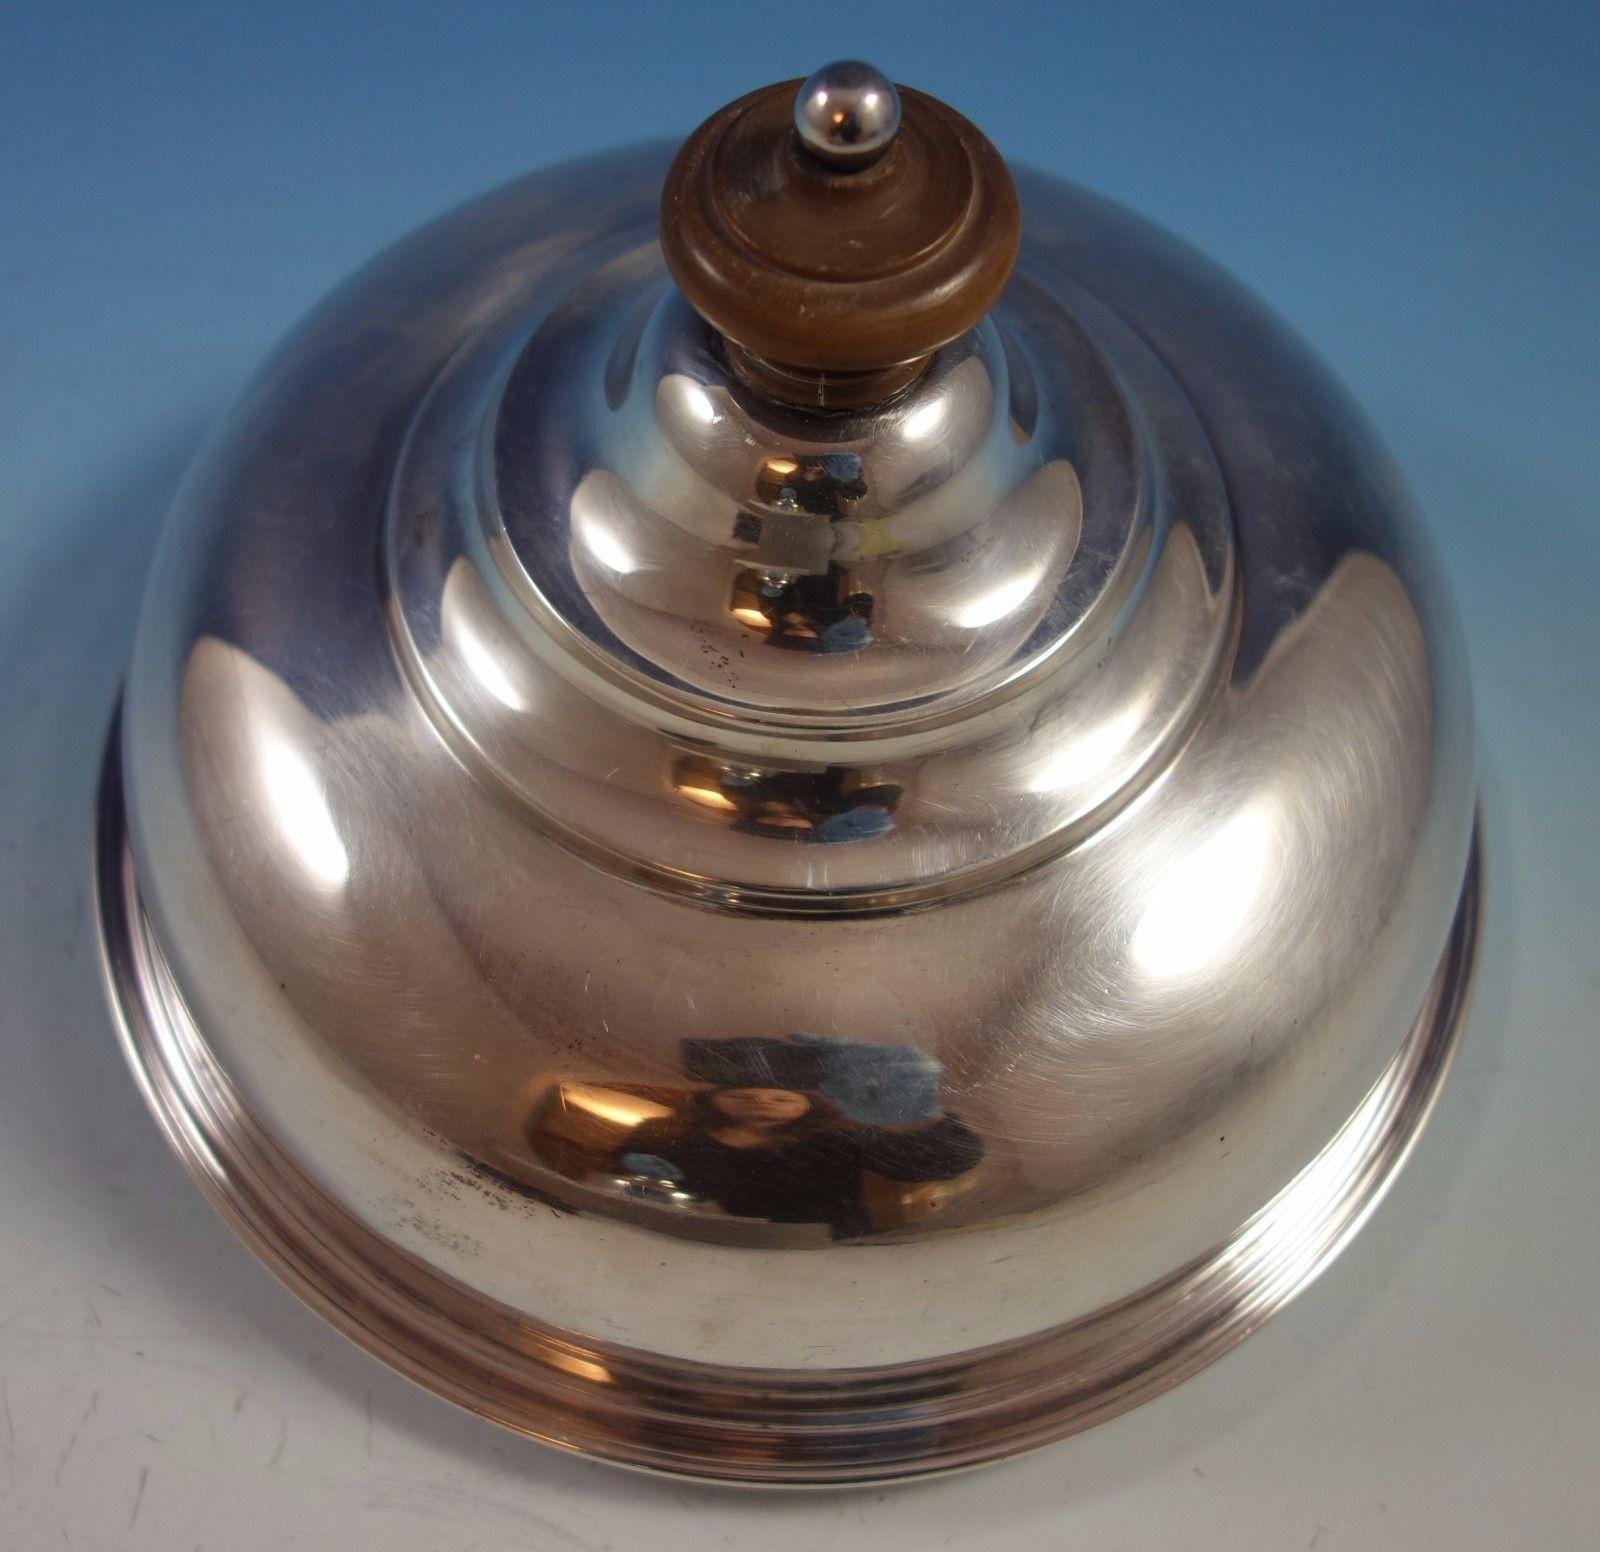 Sterling silver quail / cheese dome.

English sterling
Fabulous English sterling silver small dome with a wood knob. Hallmarked for London in 1898. It measures 6 tall x 7 1/2 and weighs 18.18 ozt. It is not monogrammed and is in excellent